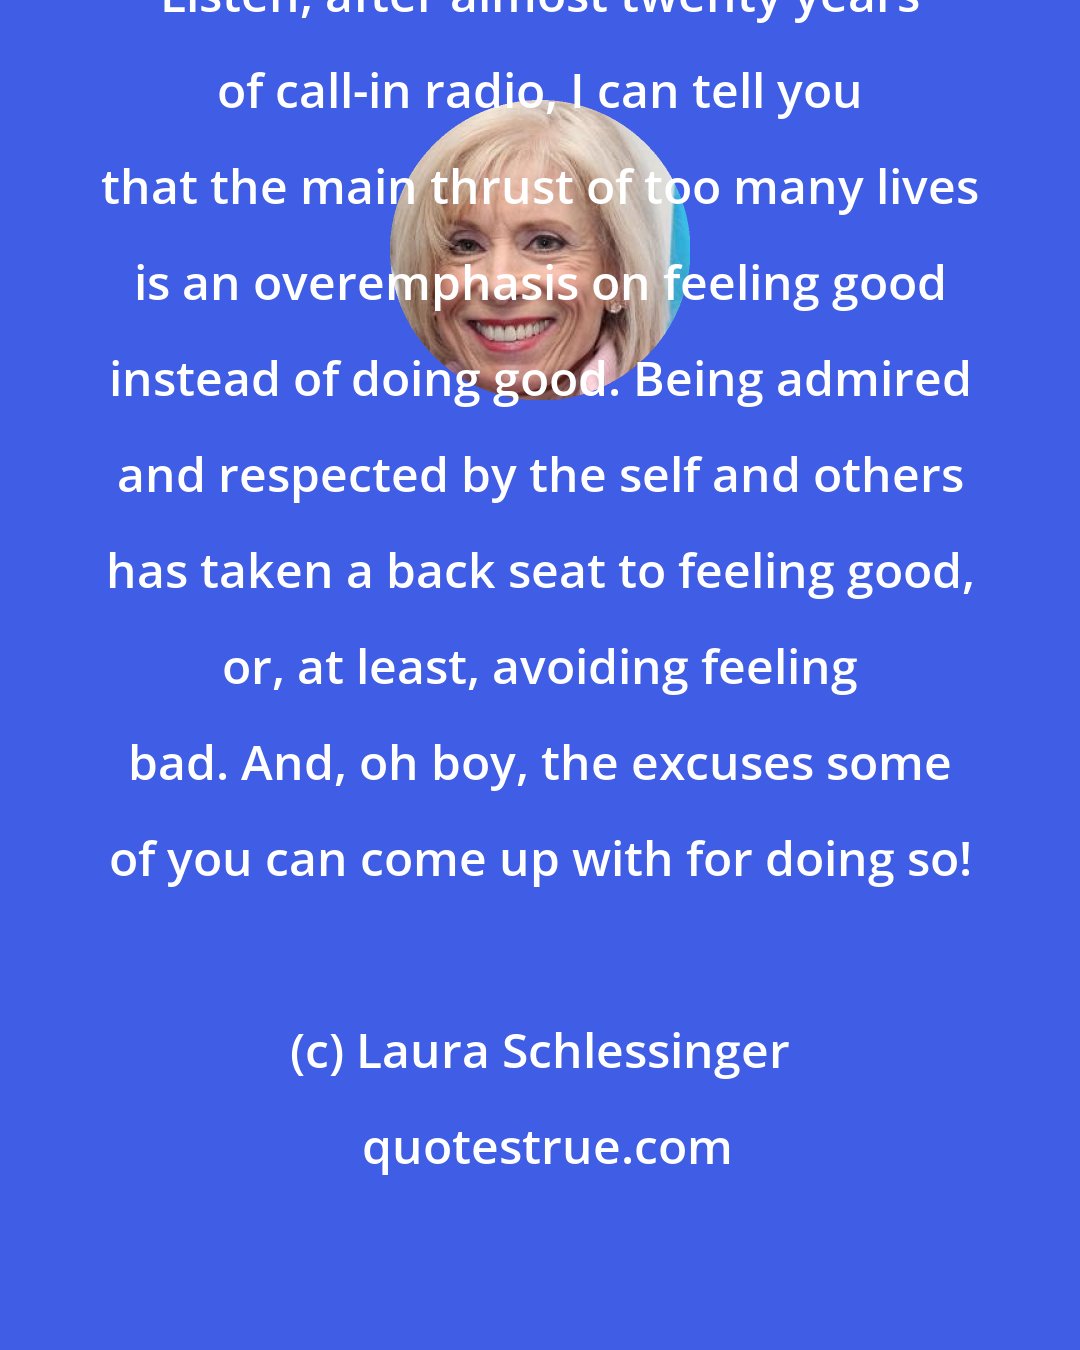 Laura Schlessinger: Listen, after almost twenty years of call-in radio, I can tell you that the main thrust of too many lives is an overemphasis on feeling good instead of doing good. Being admired and respected by the self and others has taken a back seat to feeling good, or, at least, avoiding feeling bad. And, oh boy, the excuses some of you can come up with for doing so!